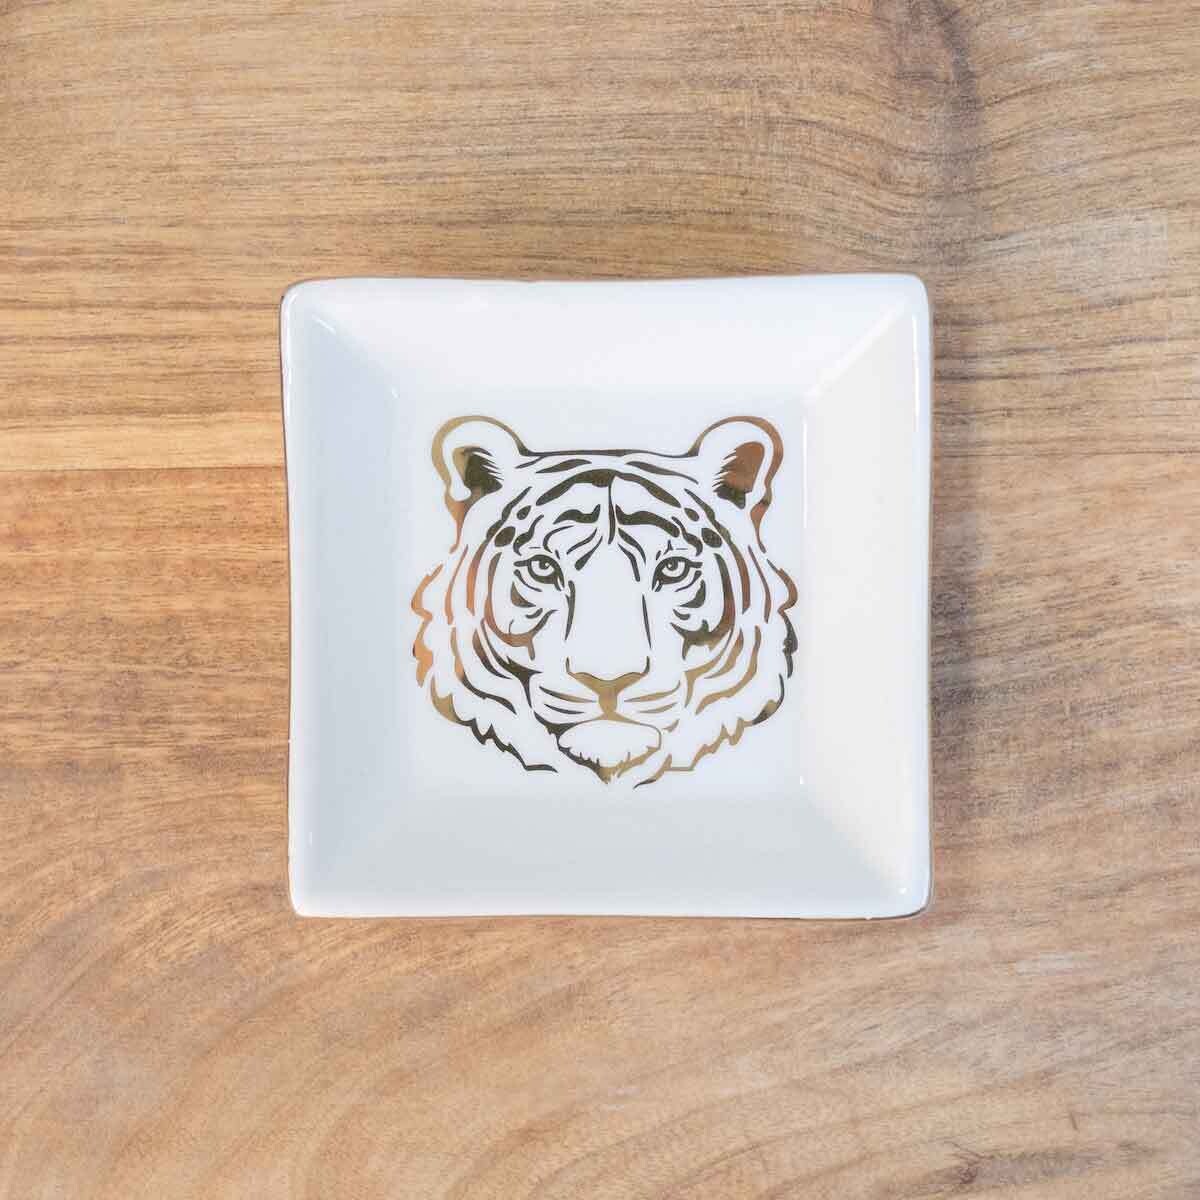 Trinket Dish - Tiger - White And Gold - 4